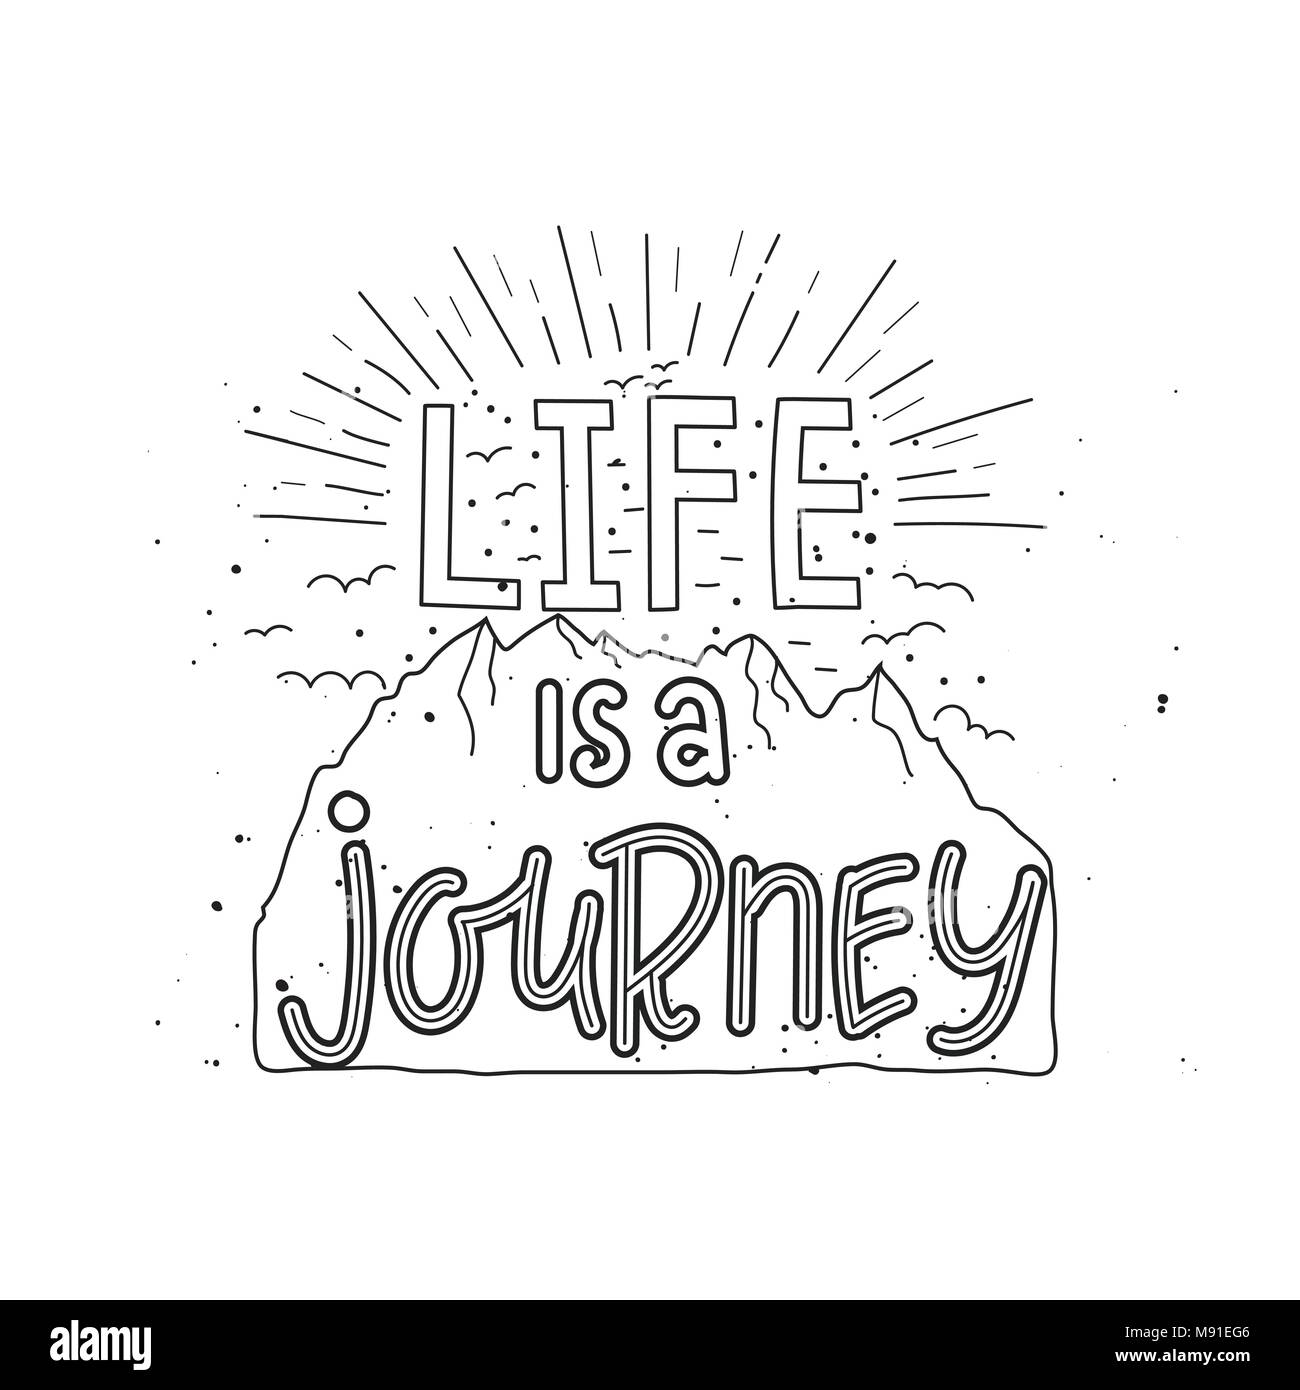 Life is a journey. Hand drawn lettering quote. Vector illustration with mountains and handwritten text for card, banner, poster, t-shirt print. Stock Vector